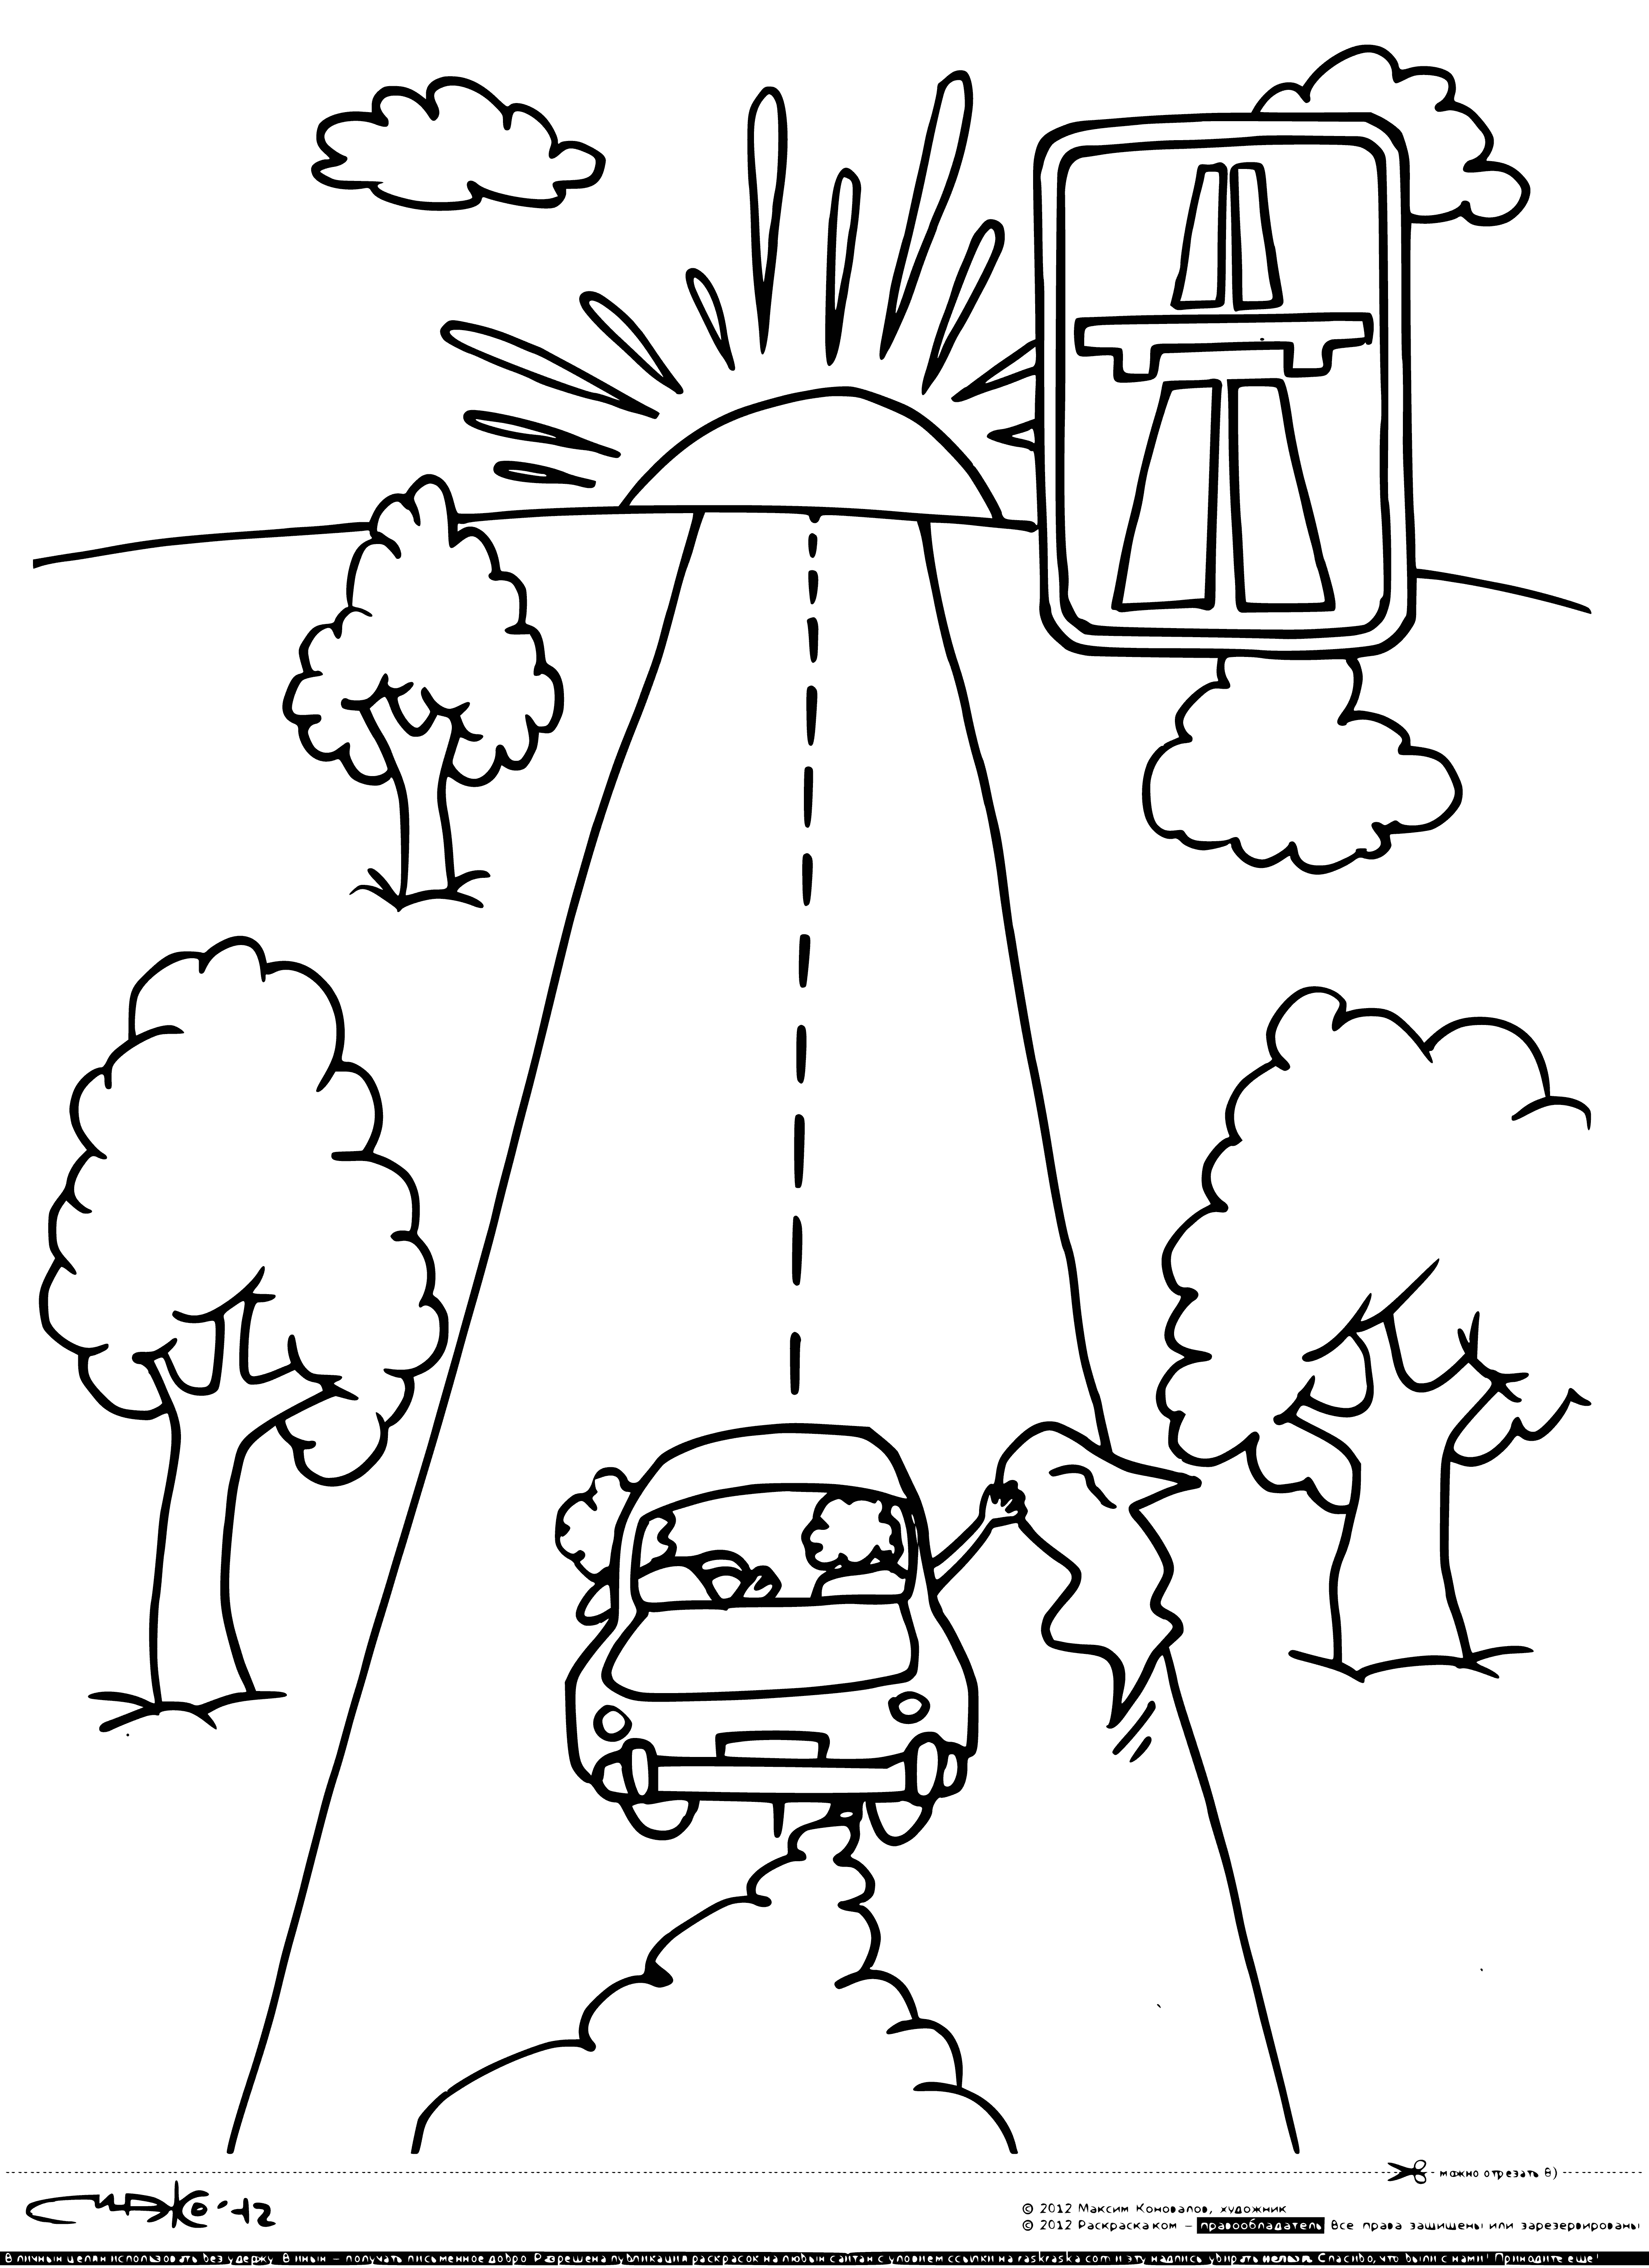 coloring page: No vehicles, yield, no pedestrians: 3 rectangles with symbols explain it all! #roadrules